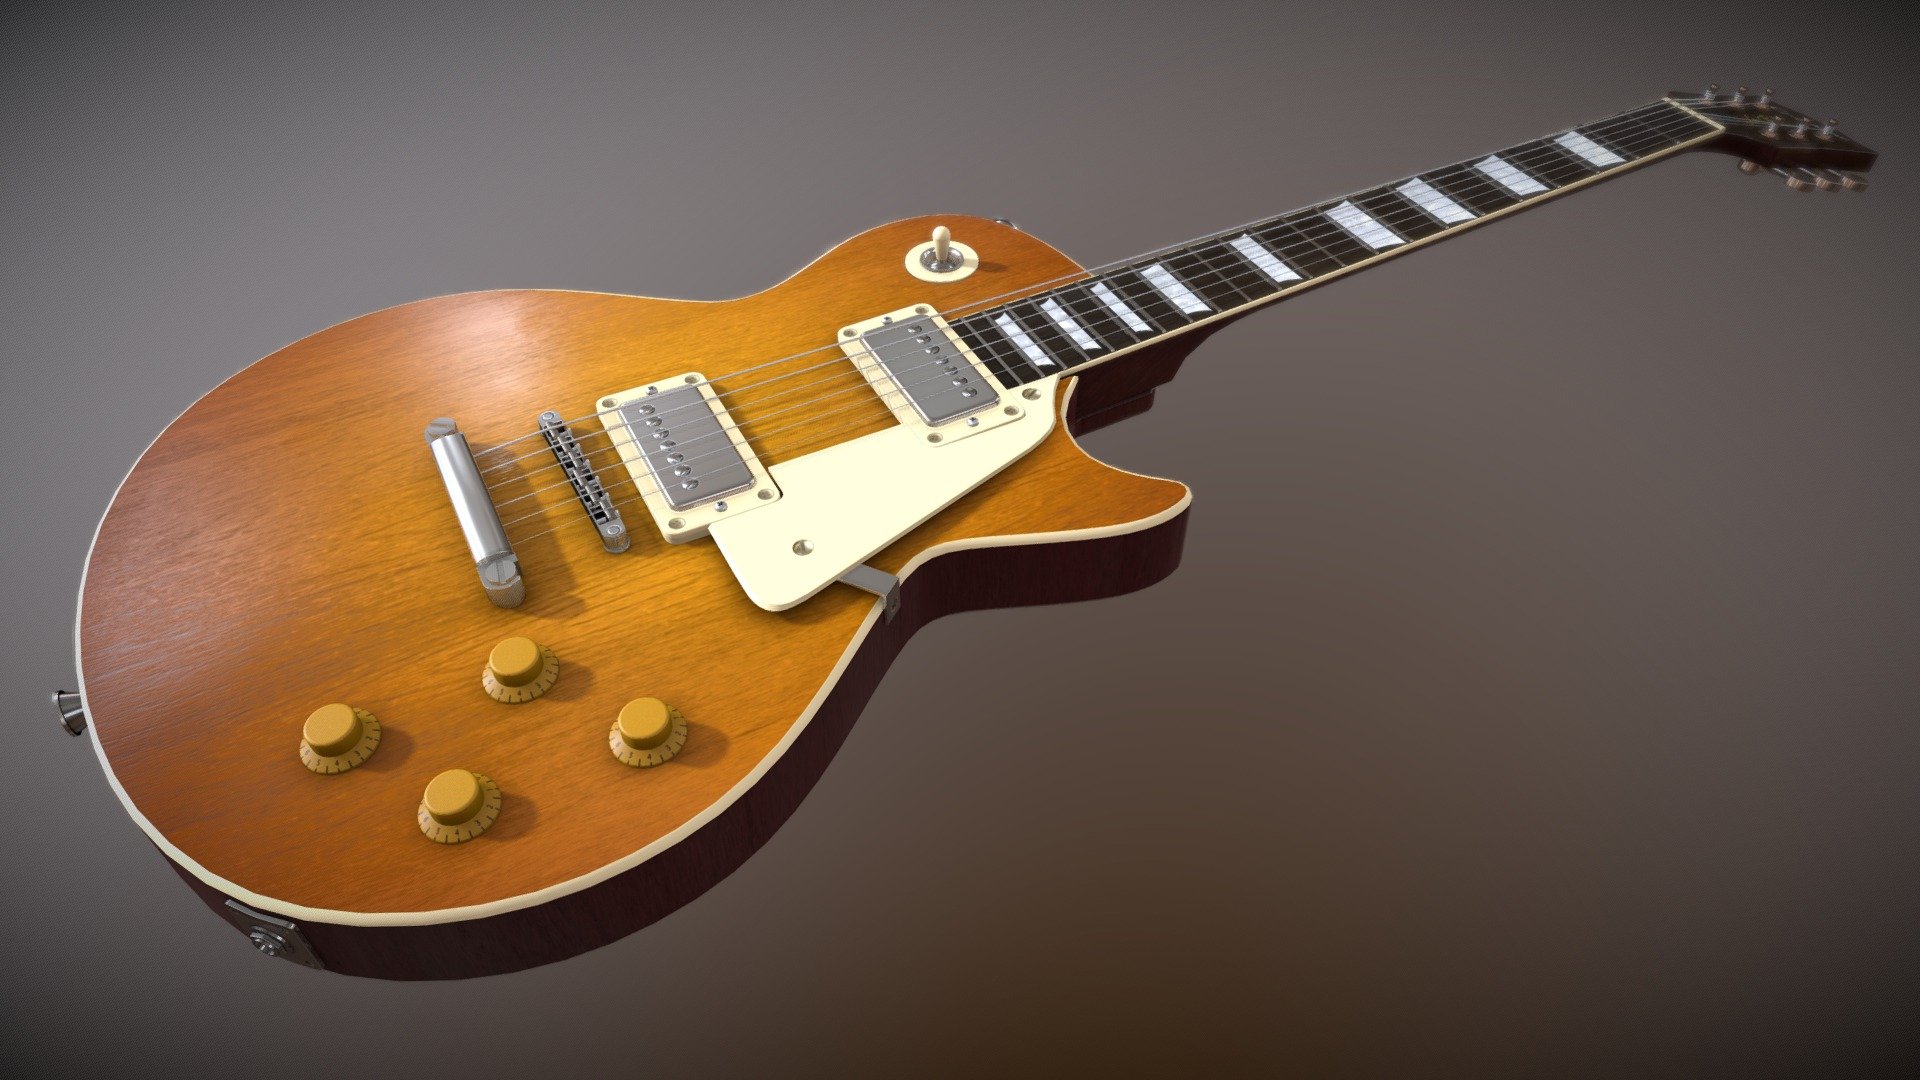 The classic Les Paul guitar. 

Fully unwrapped and UVed.
Some UVs may need to be re-arranged if you choose to use them.

Includes zip file that contains:
Blender 2.8 file with basic shader setup.
7 x 4K PNG files ( AO, Diffuse, Normal, Metal, Spec, Roughness &amp; Bump) - Les Paul Guitar - Epiphone - Buy Royalty Free 3D model by Sibience 3d model